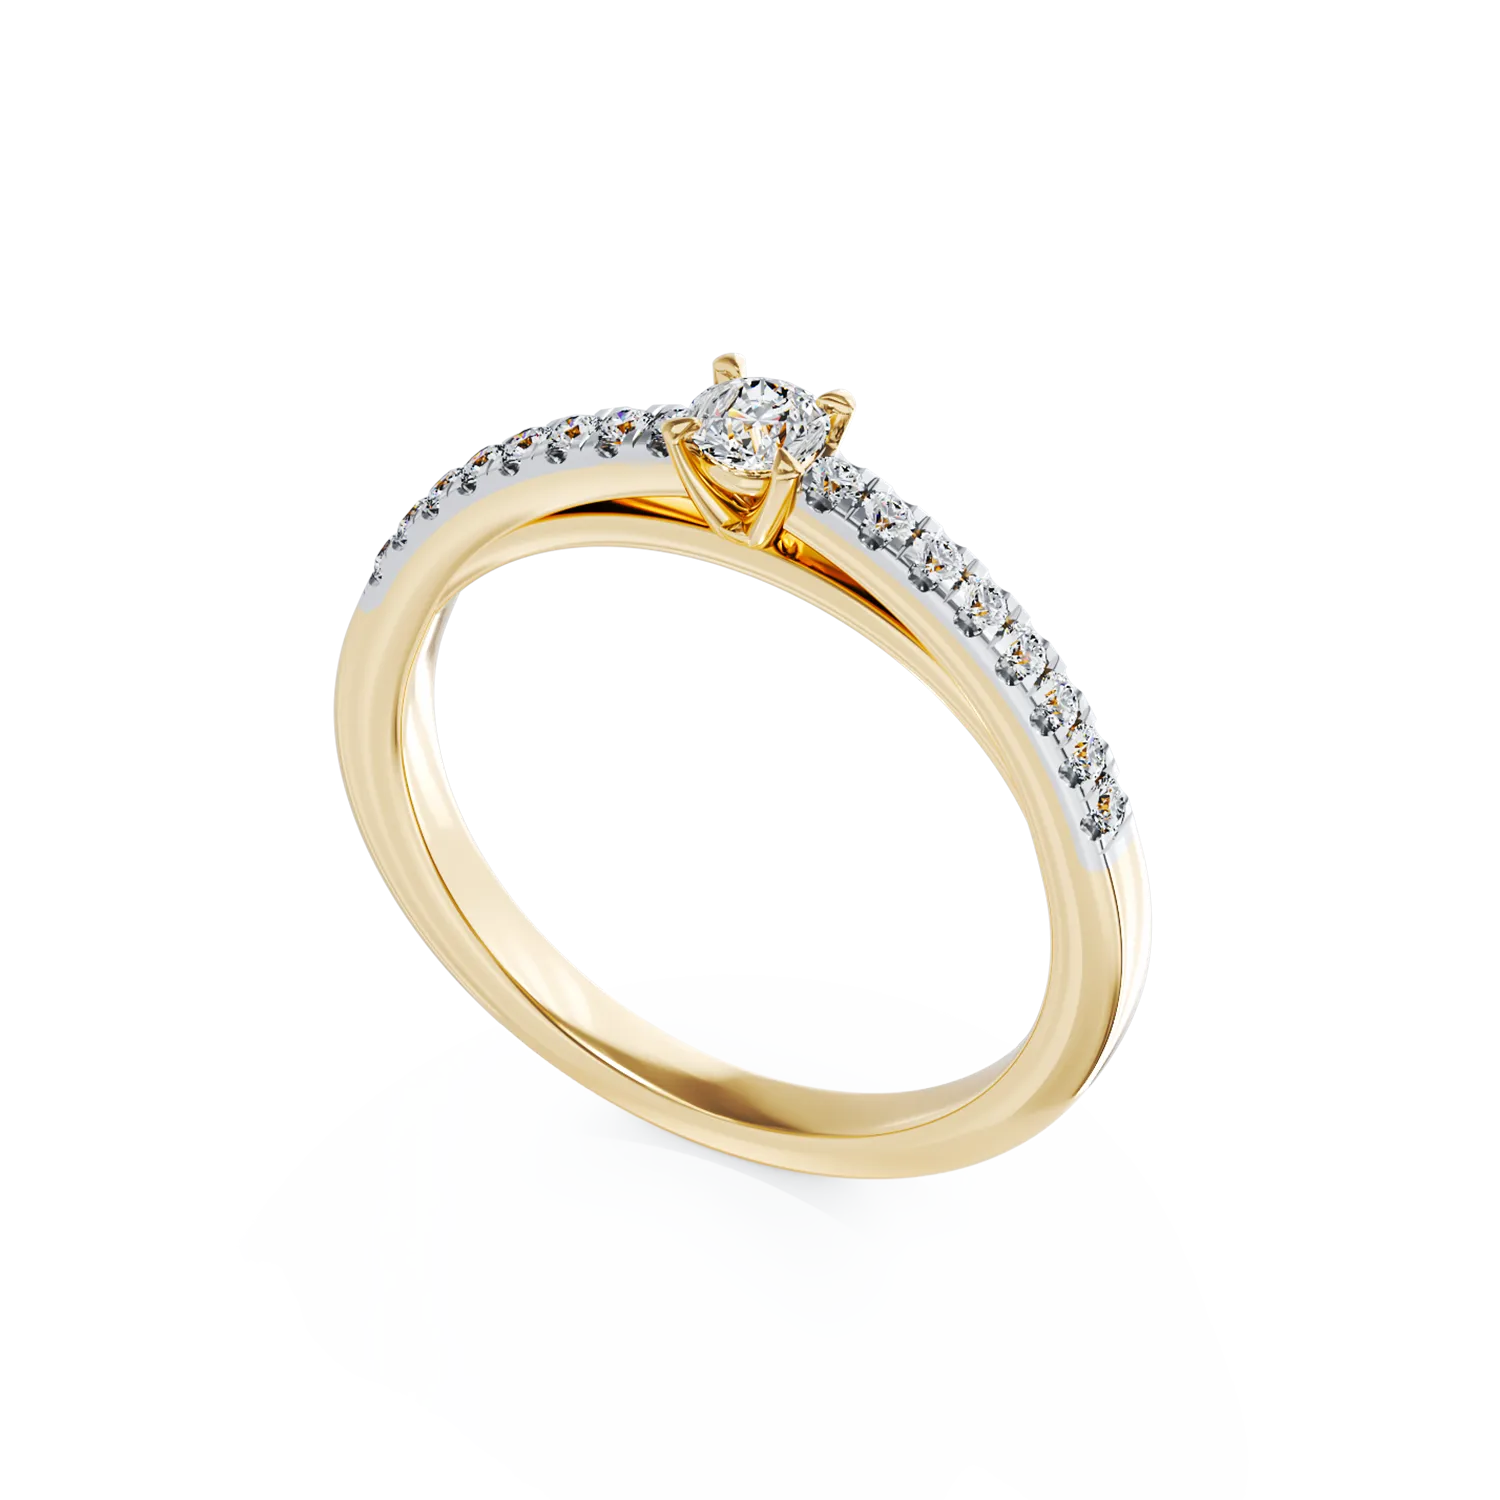 18K yellow gold engagement ring with 0.11ct diamond and 0.145ct diamonds